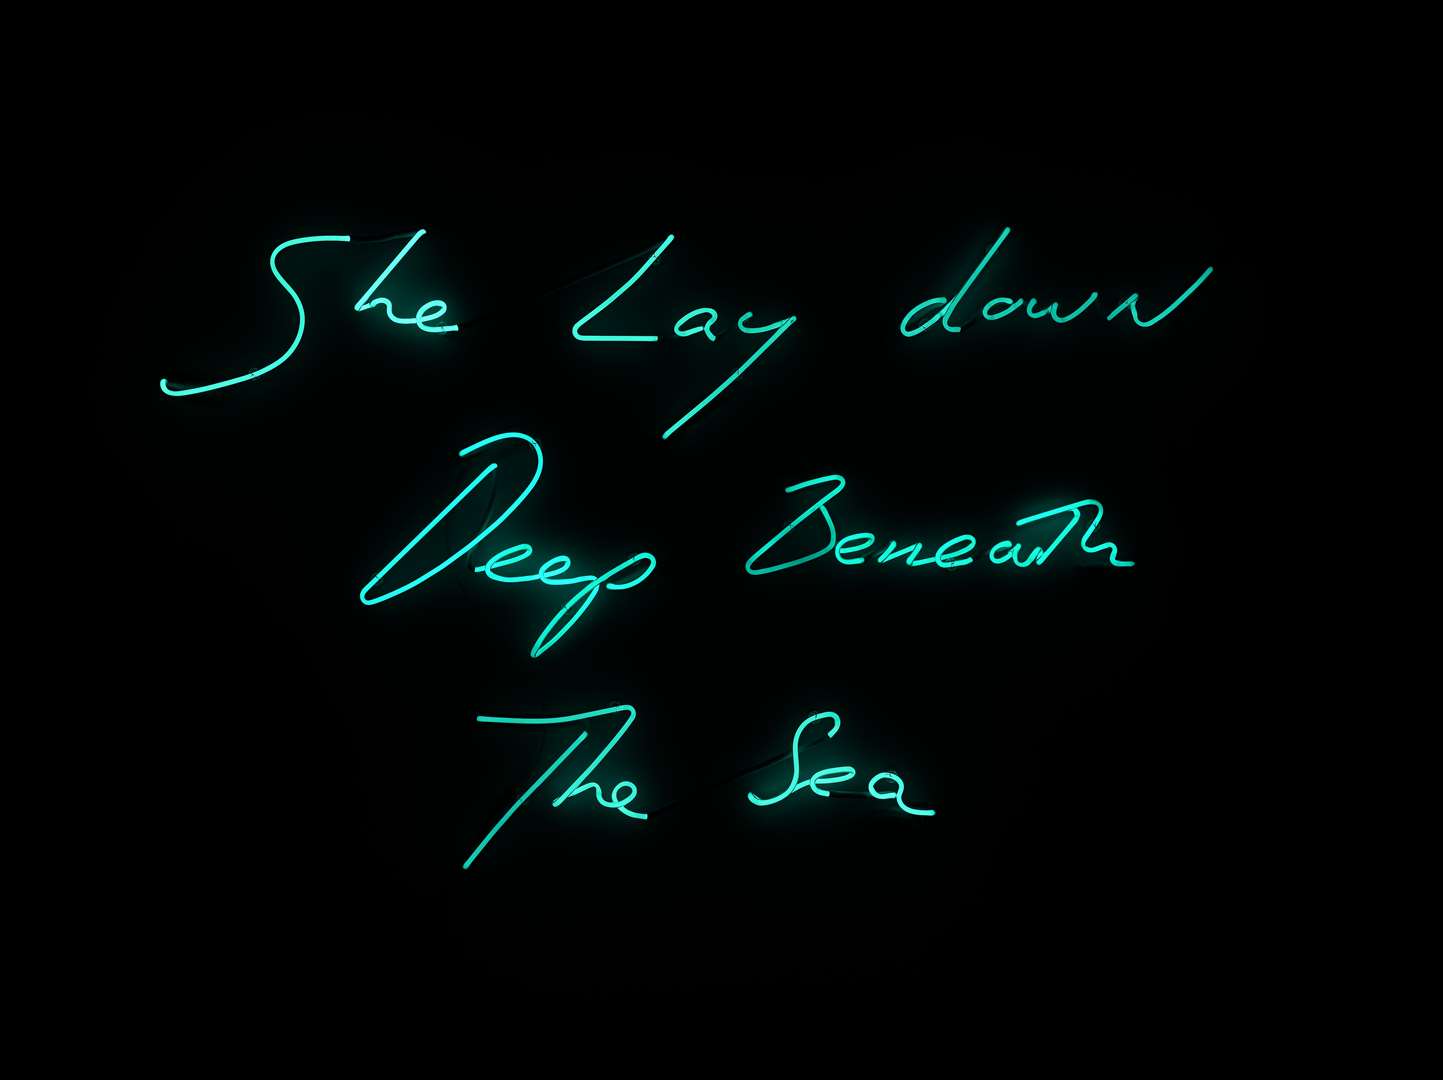 Tracey Emin's She Lay Down Deep Beneath The Sea, 2012. Picture taken by Ben Westoby